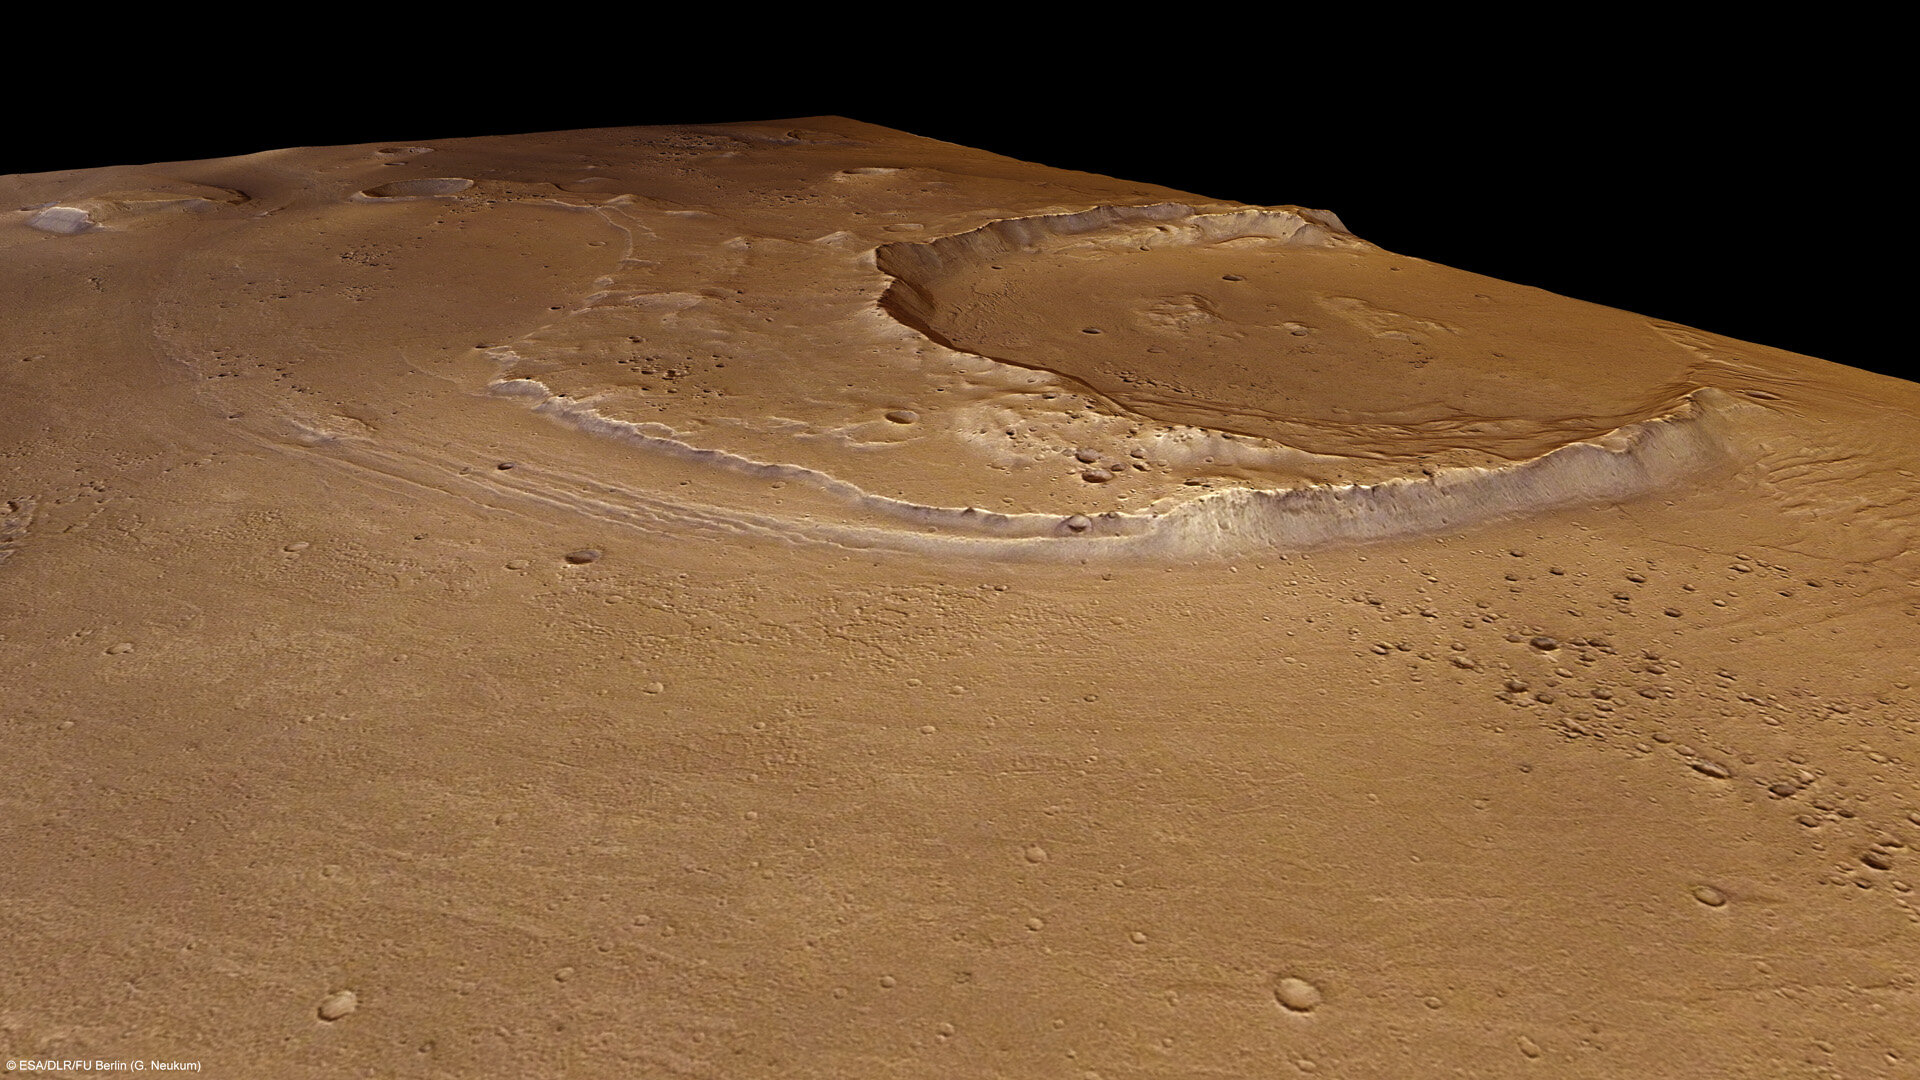 Oraibi crater in perspective